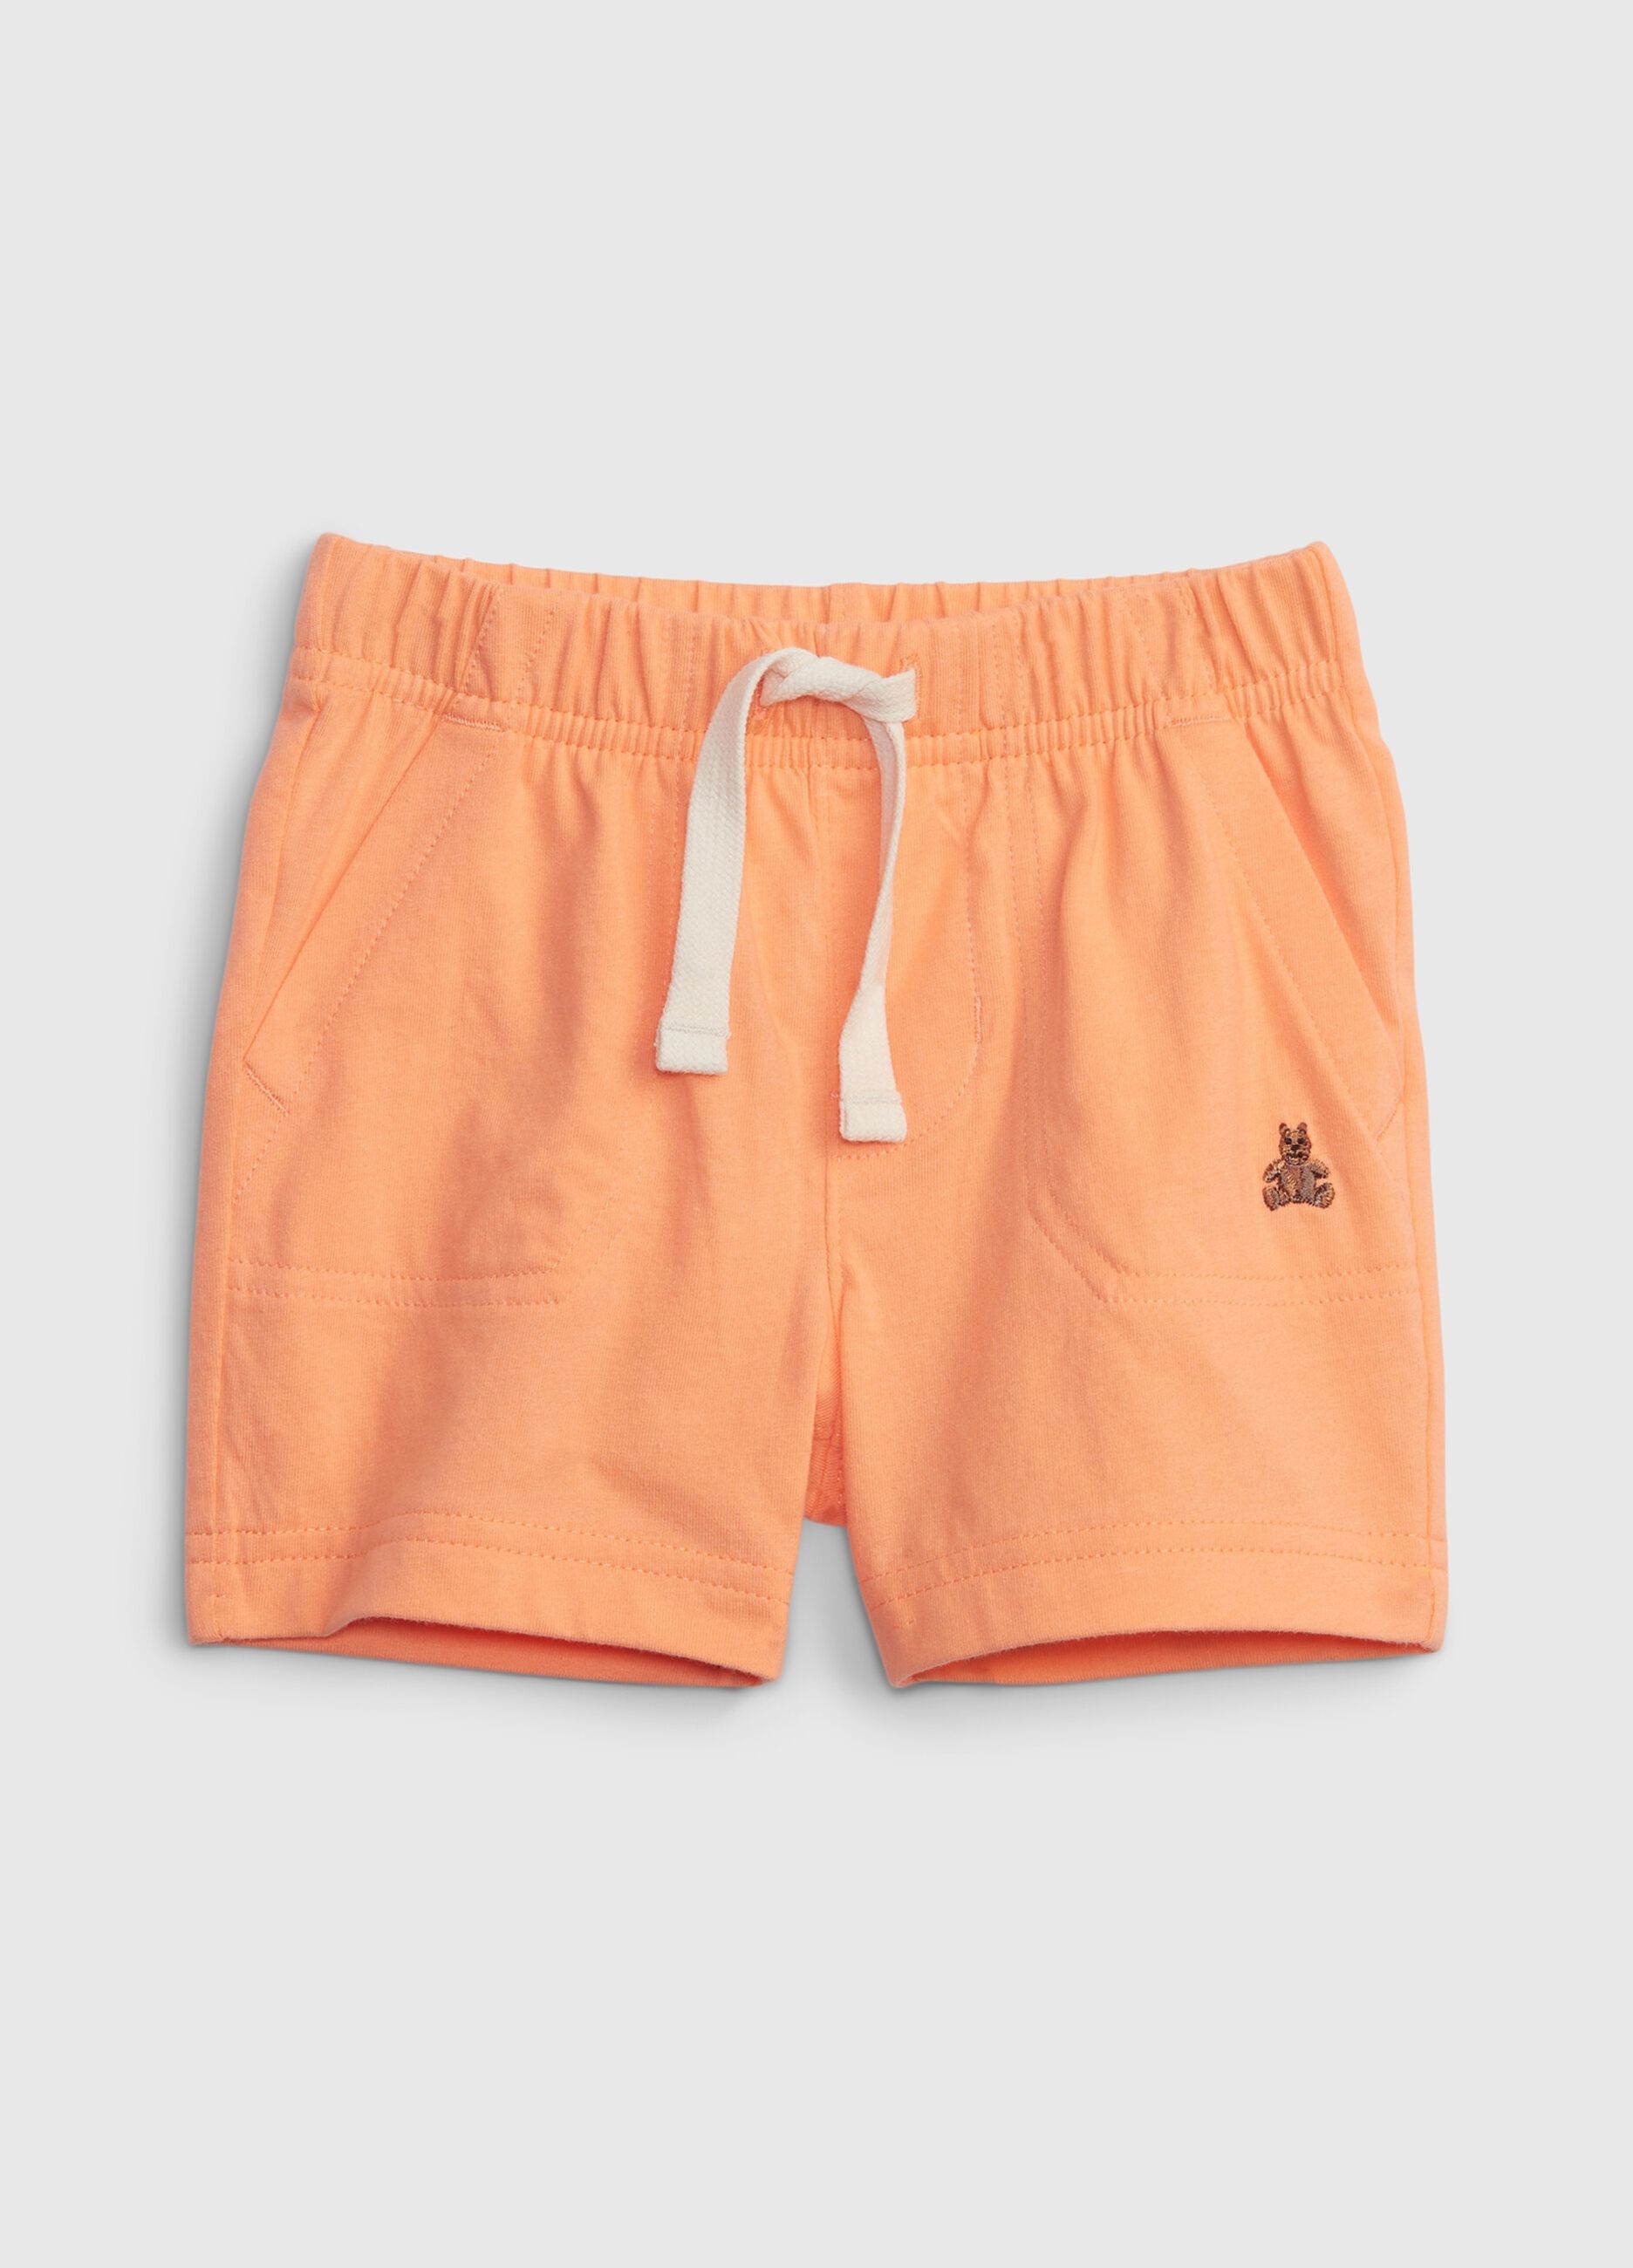 Shorts with drawstring and embroidered bear